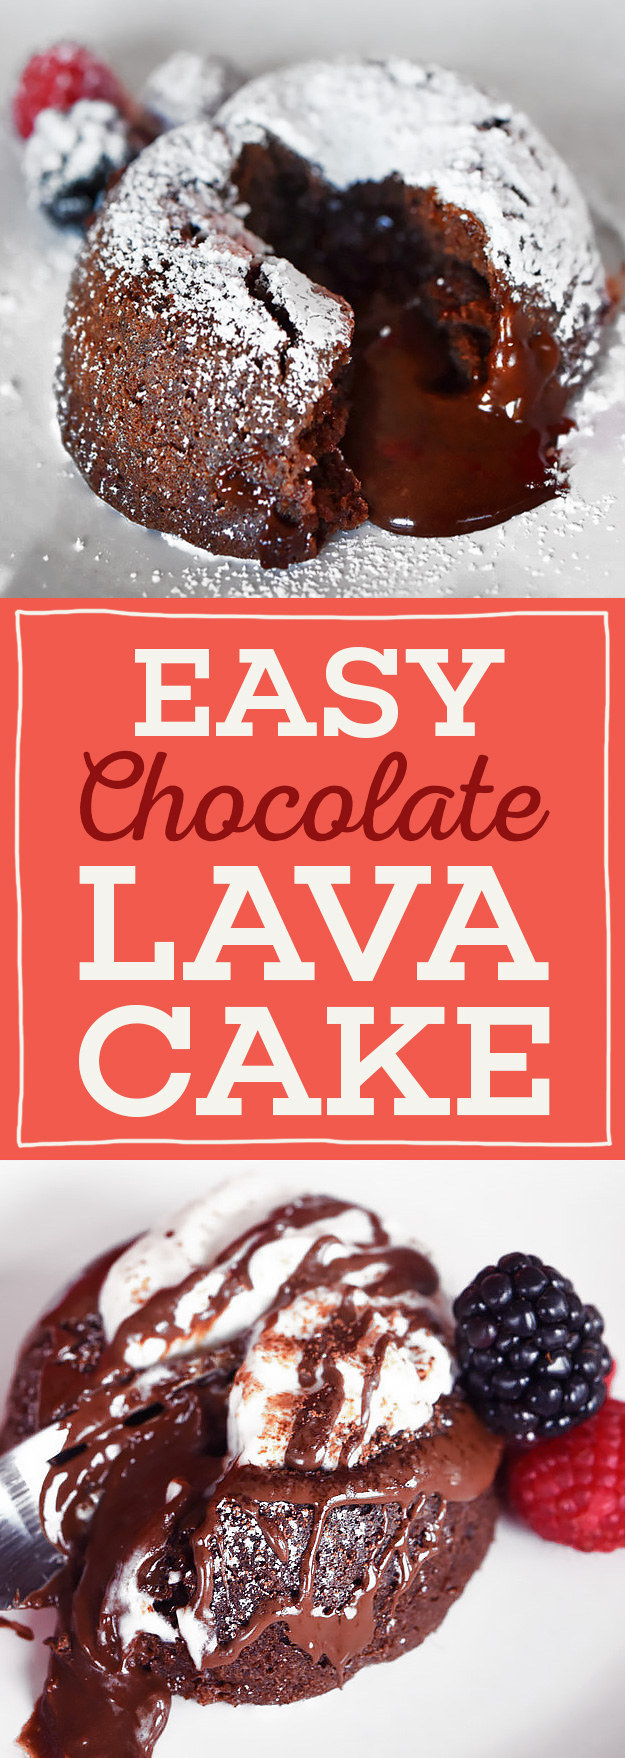 How To Make The Easiest, Most Delicious Chocolate Lava Cakes